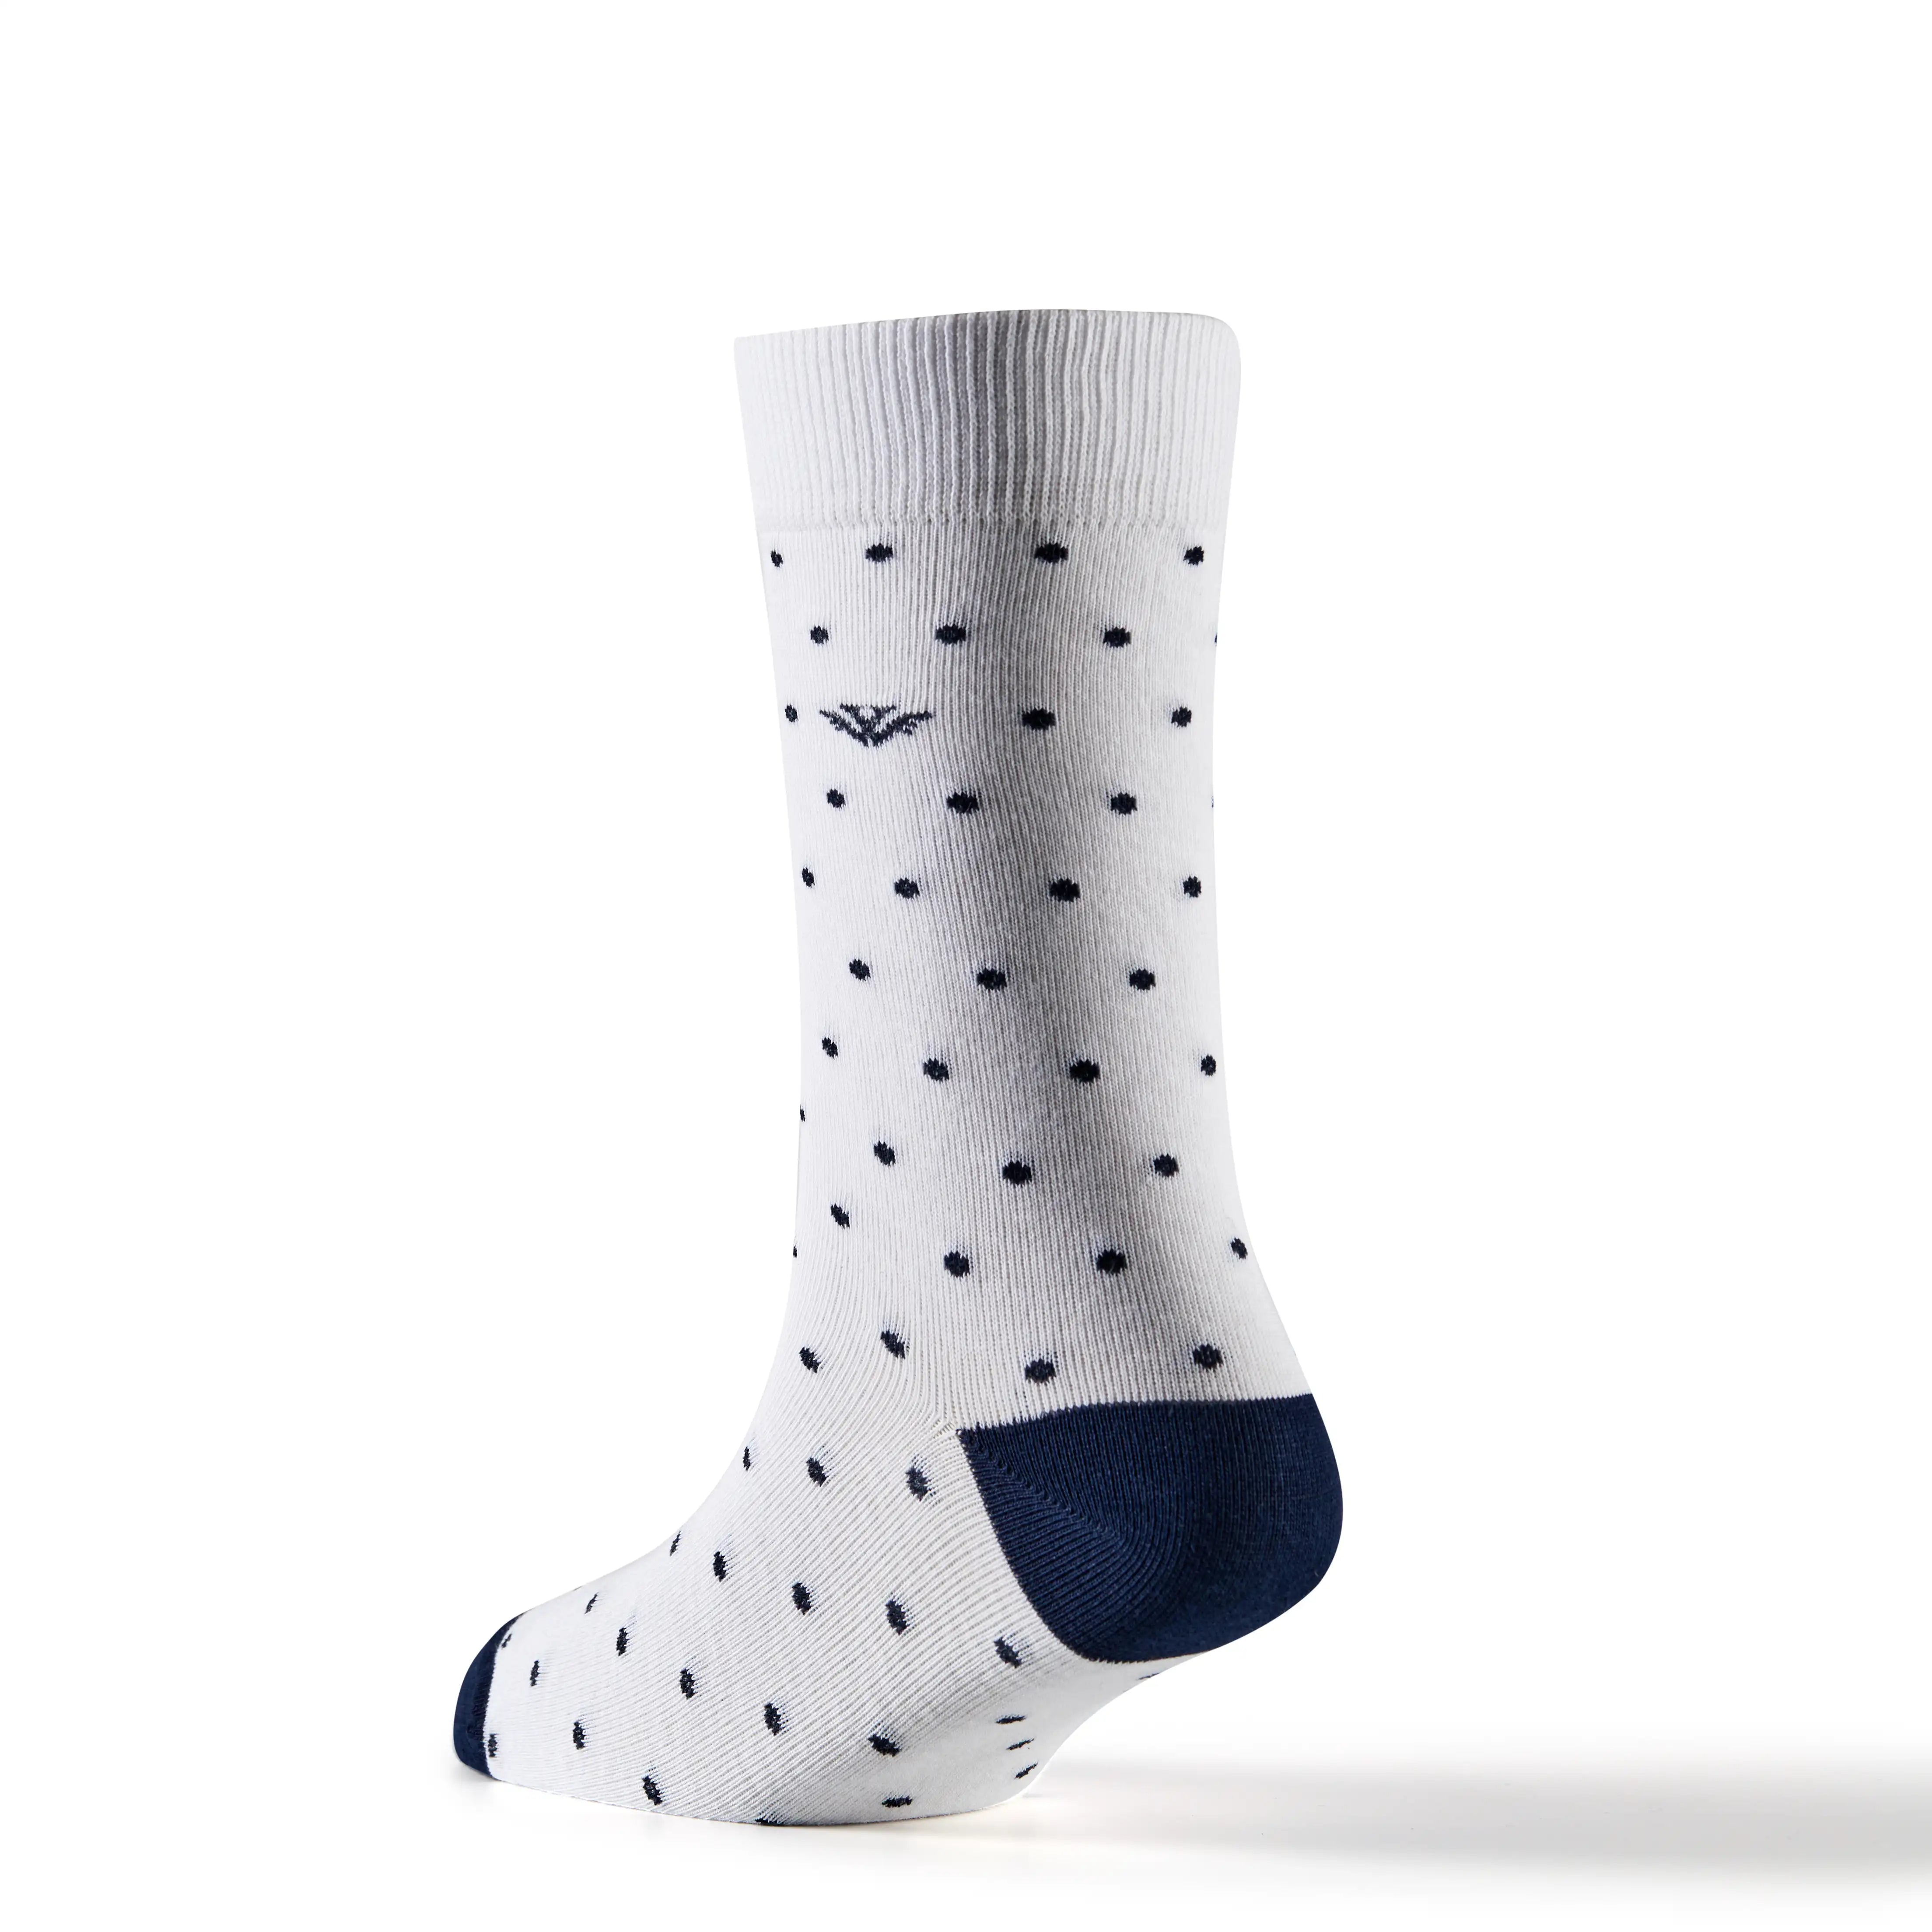 Young Wings Multicolor Dots Design Free Size Calf Length Causal & Formal Wear Socks-(Pack of 5, Style no.3702-M1)